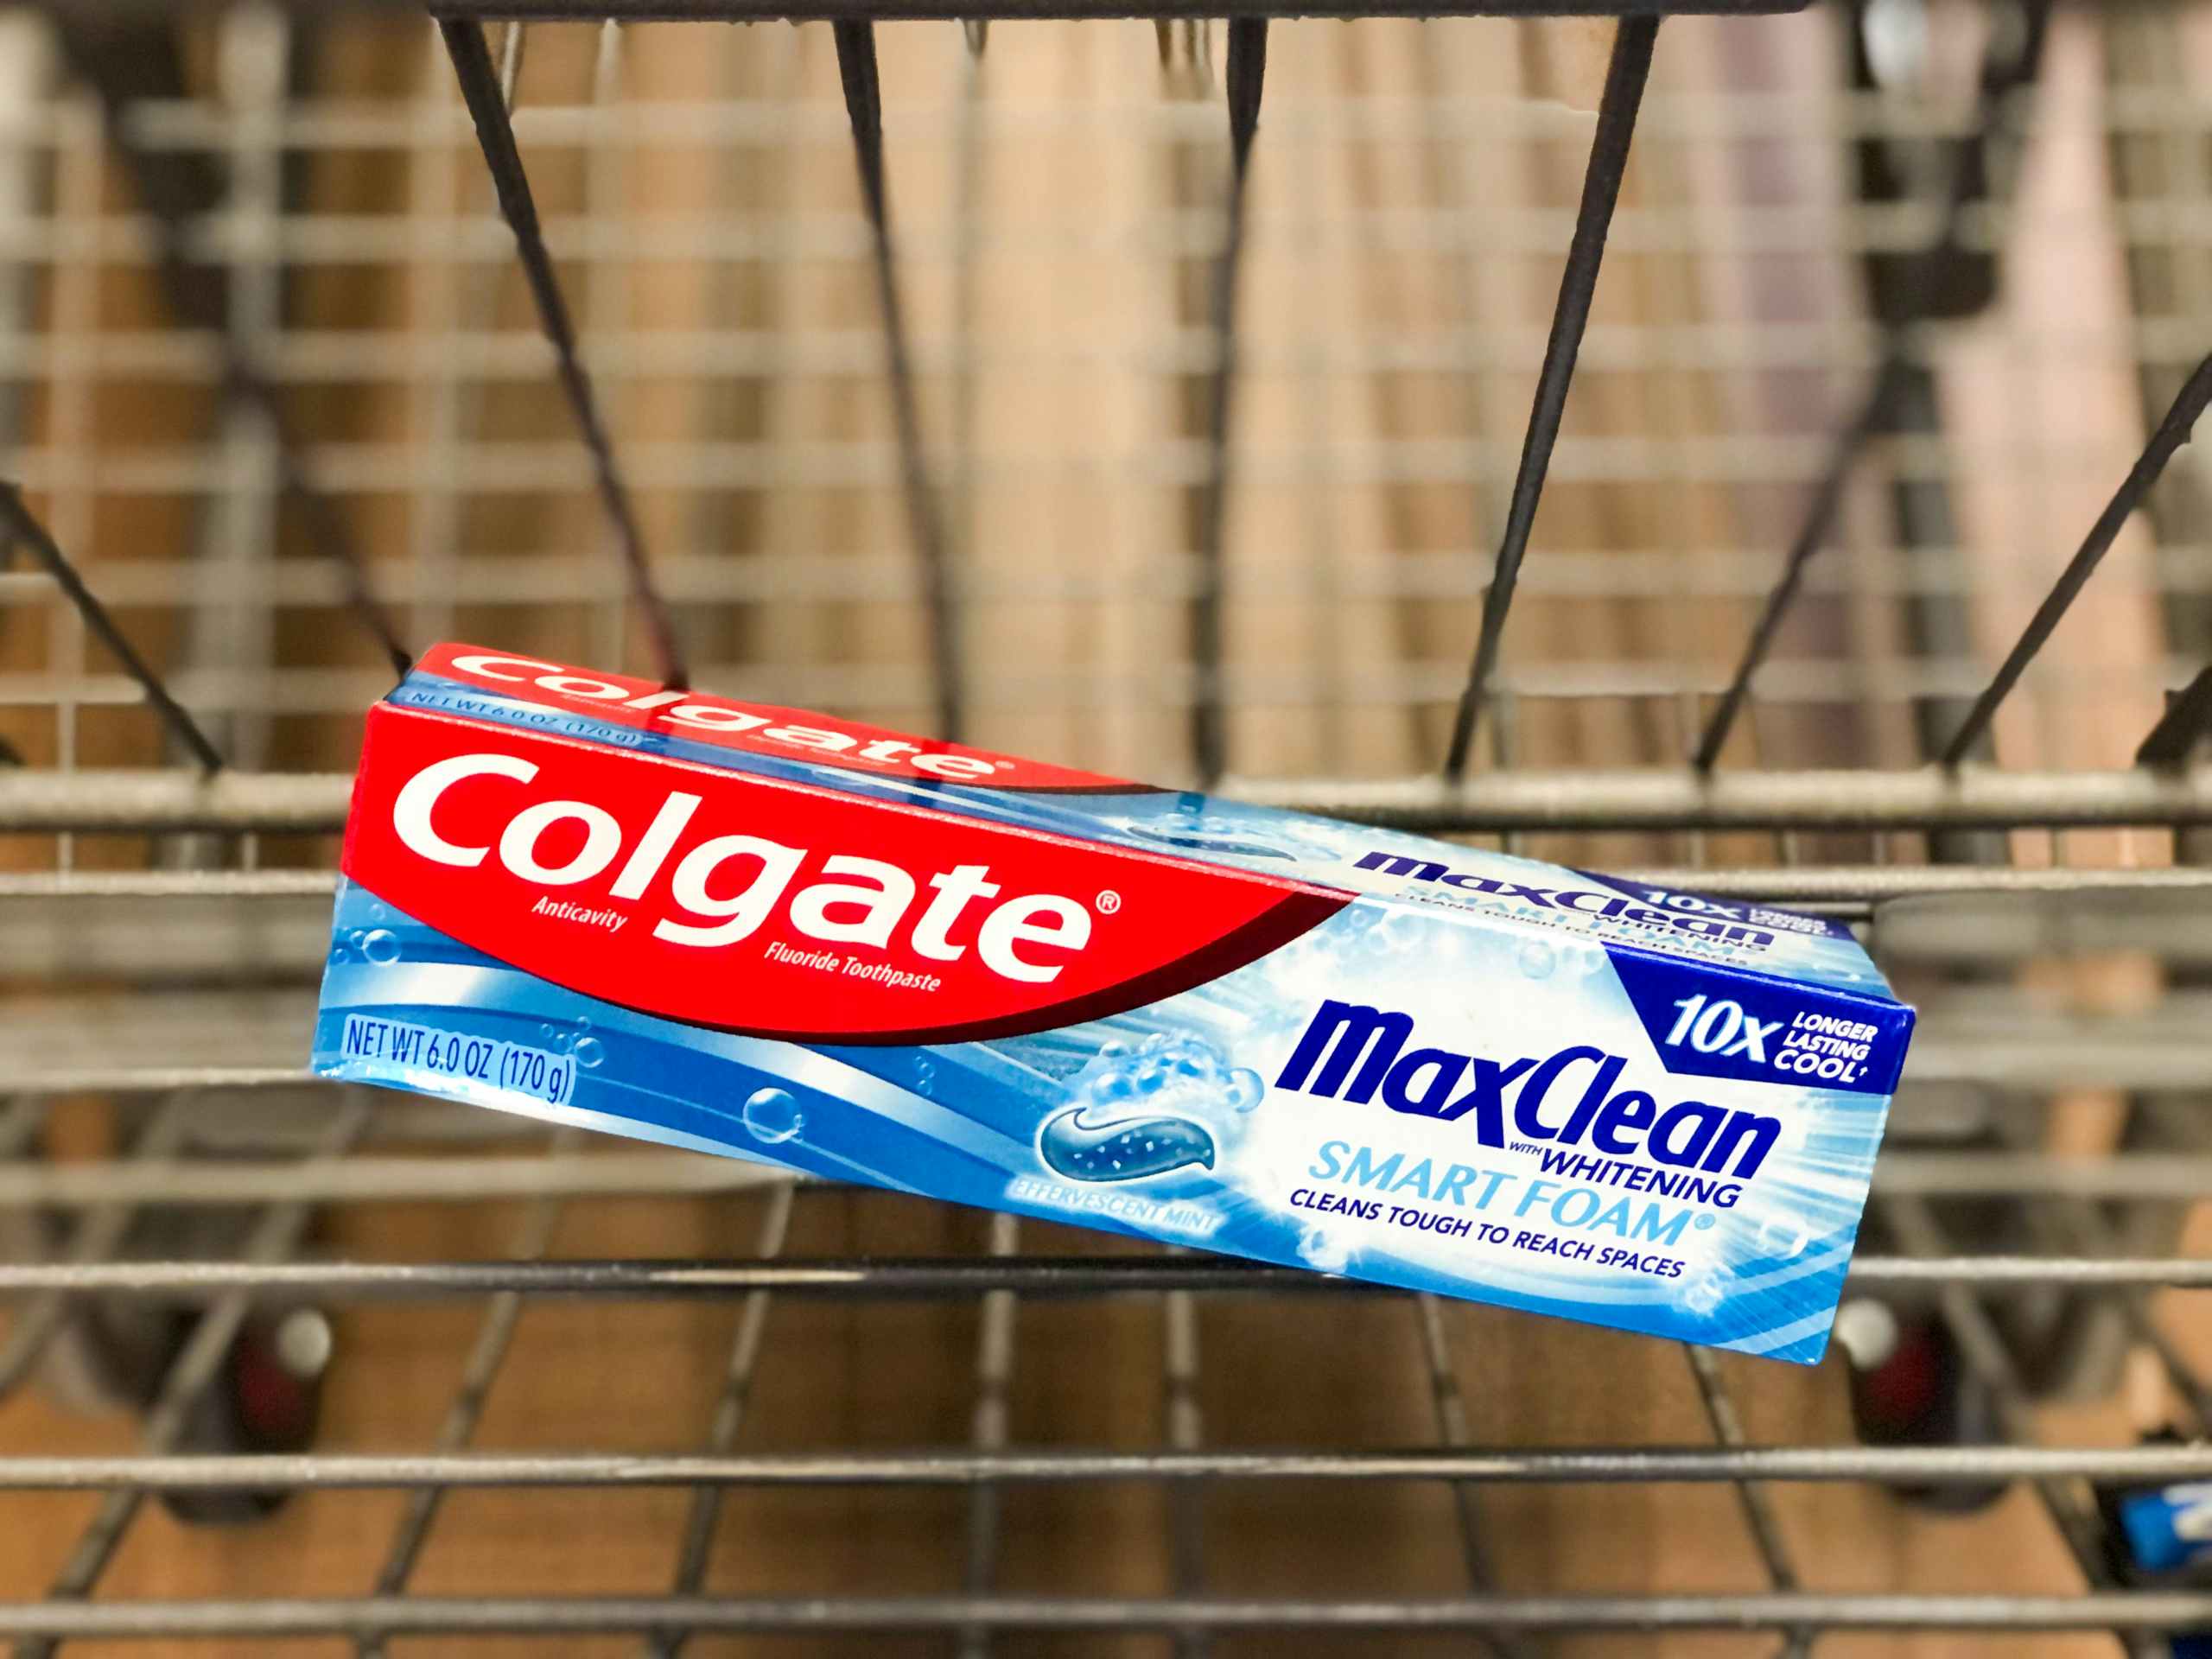 Colgate toothpaste in store shopping Cart